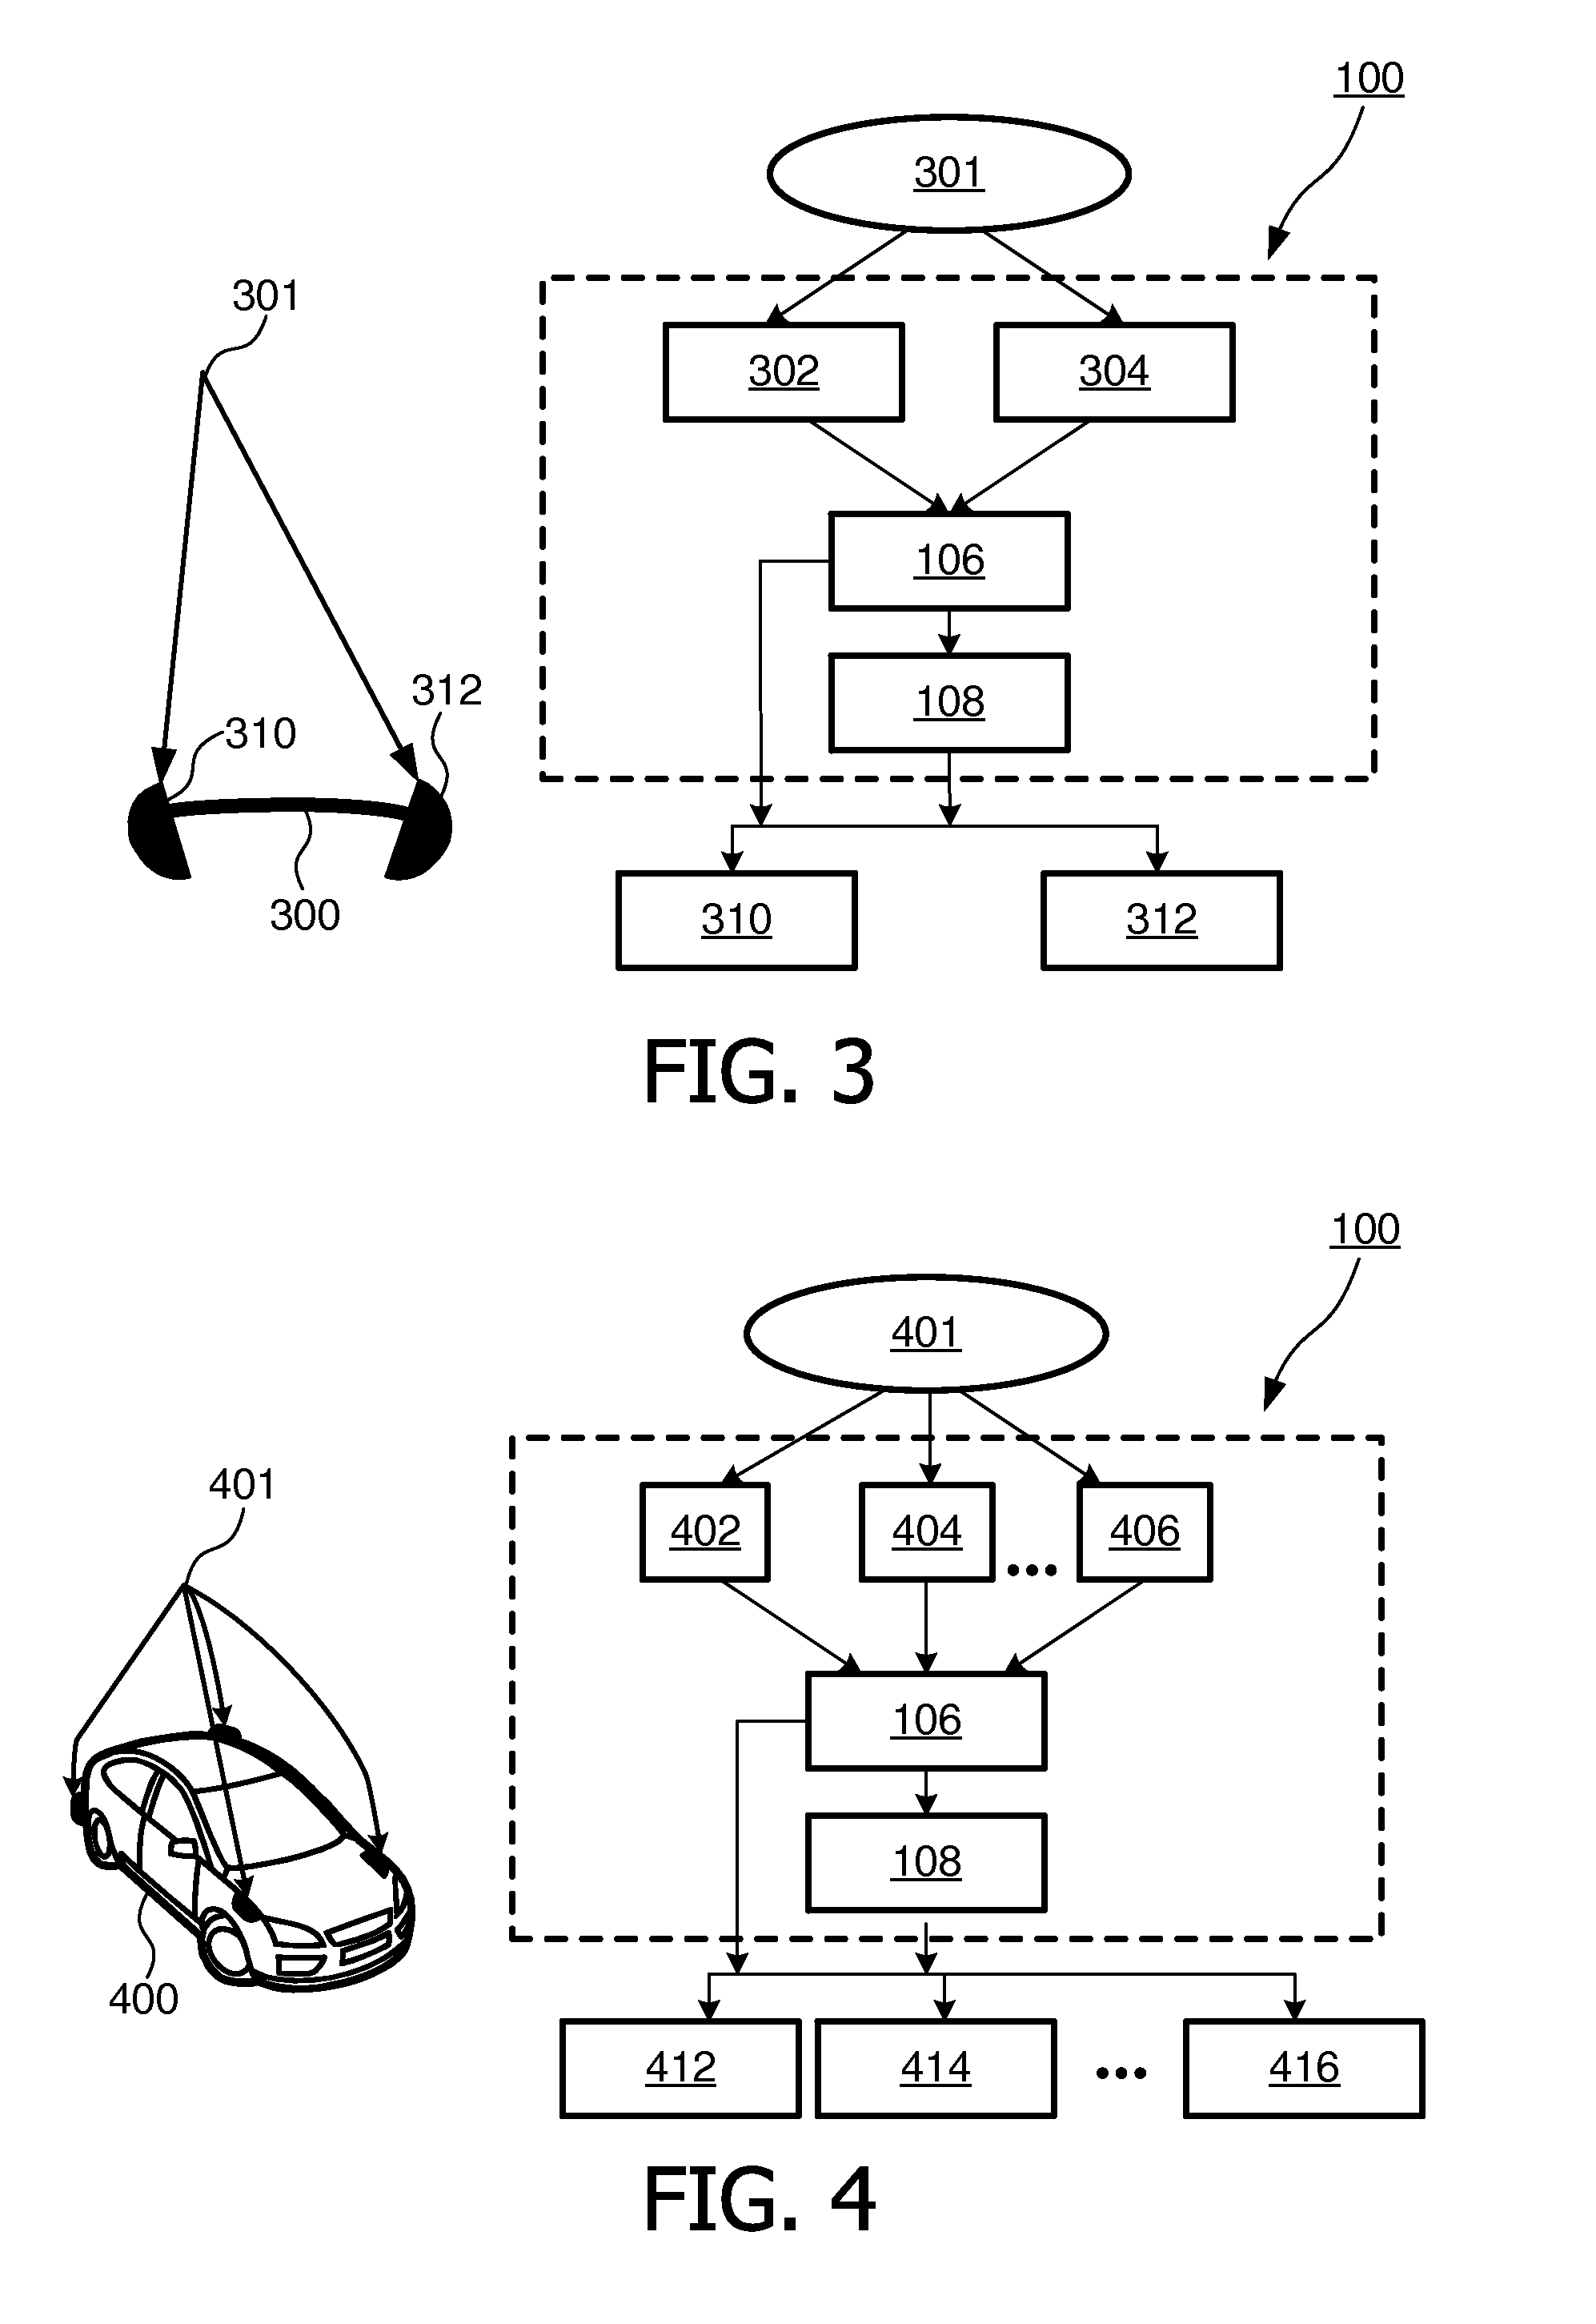 Method and apparatus for providing information about the source of a sound via an audio device